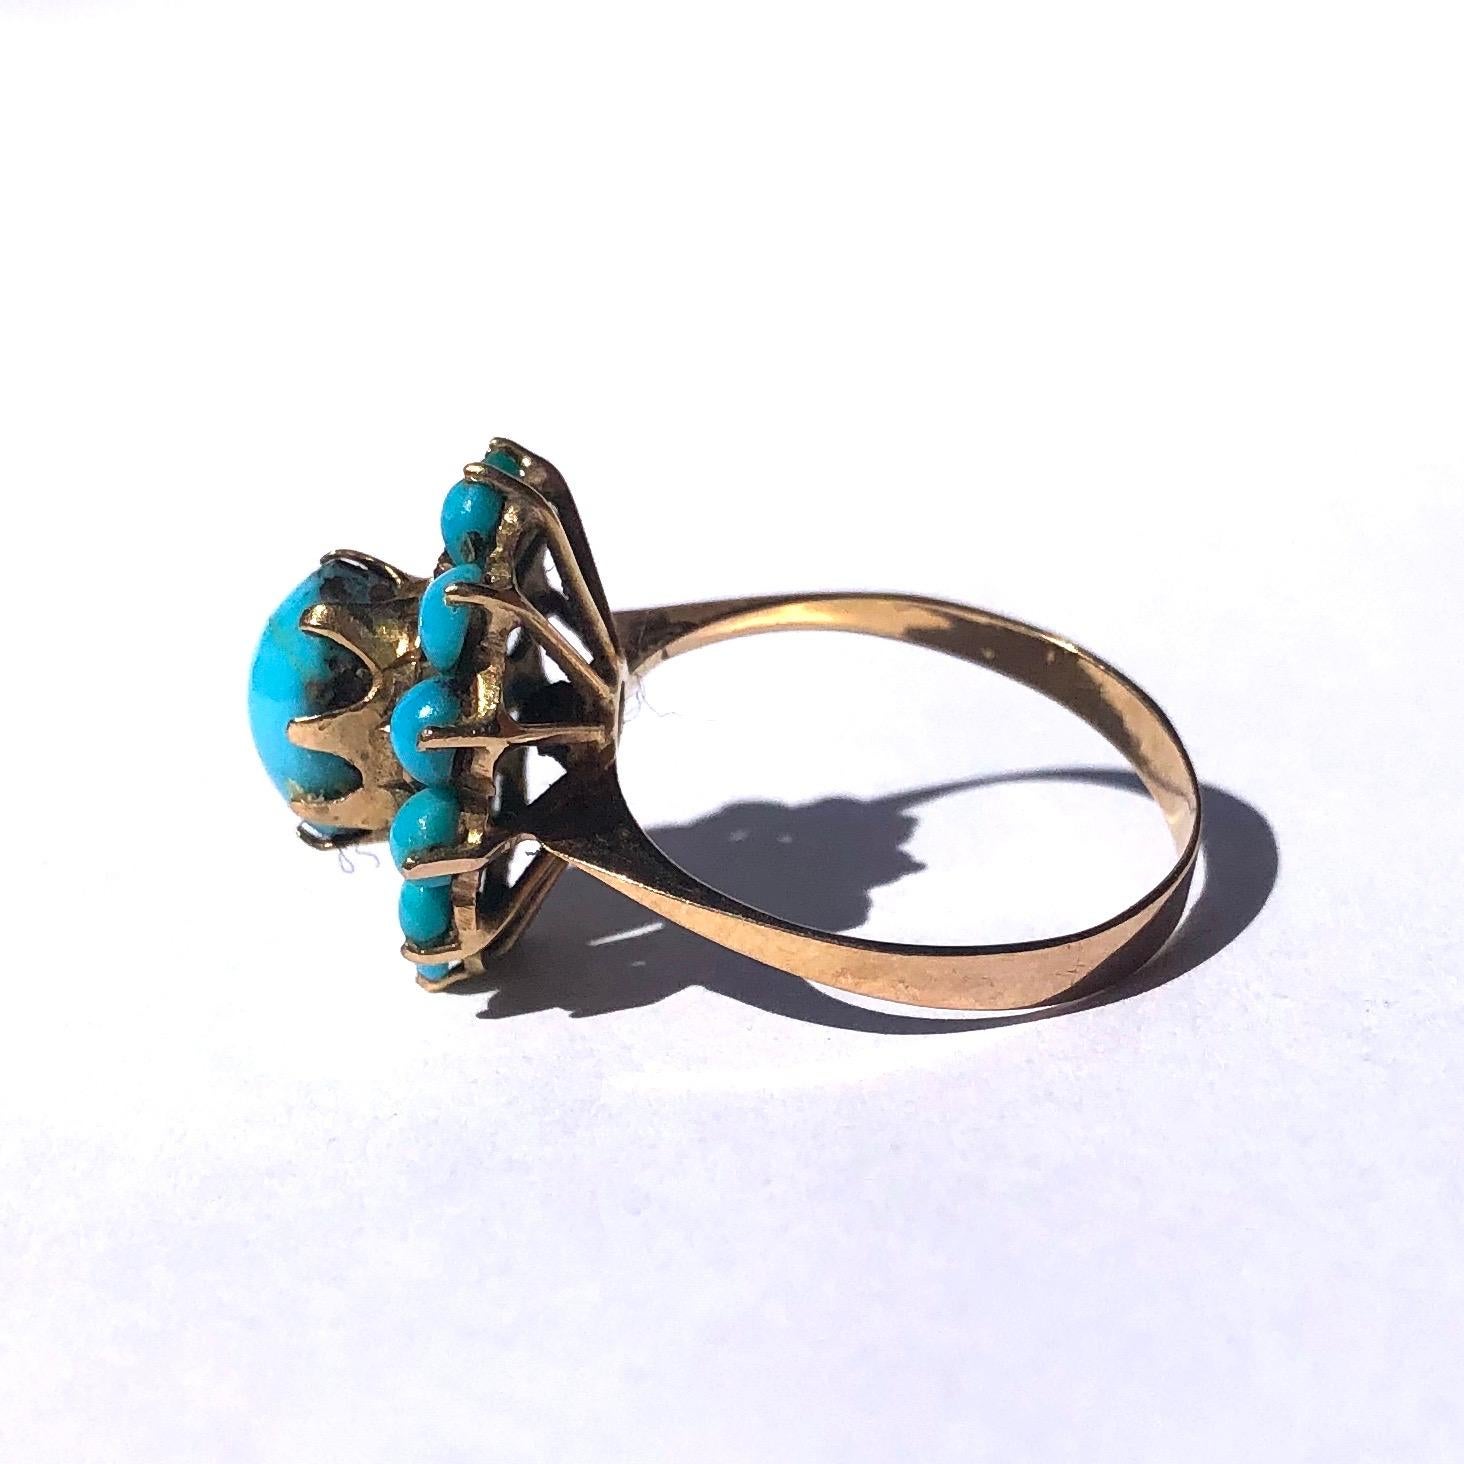 This bright turquoise is really complimented by the bright yellow 18ct gold. The central stone is held in a simple law setting which is then surrounded by a textured gold frame which smaller turquoise stones surrounding that. The underneath of the